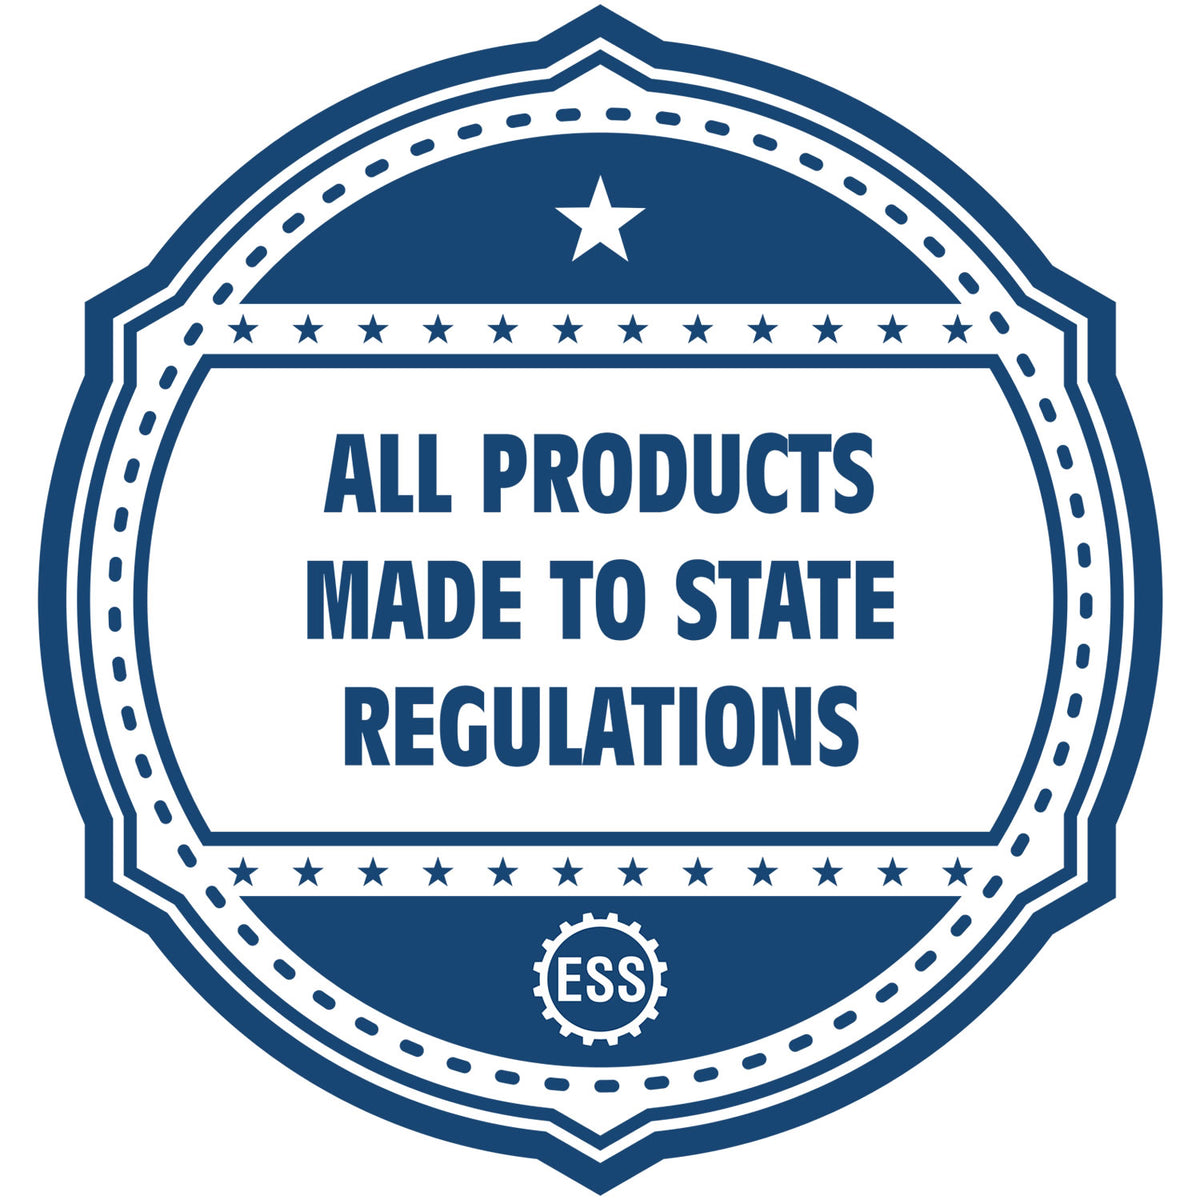 A blue icon or badge for the State of Michigan Extended Long Reach Geologist Seal showing that this product is made in compliance with state regulations.